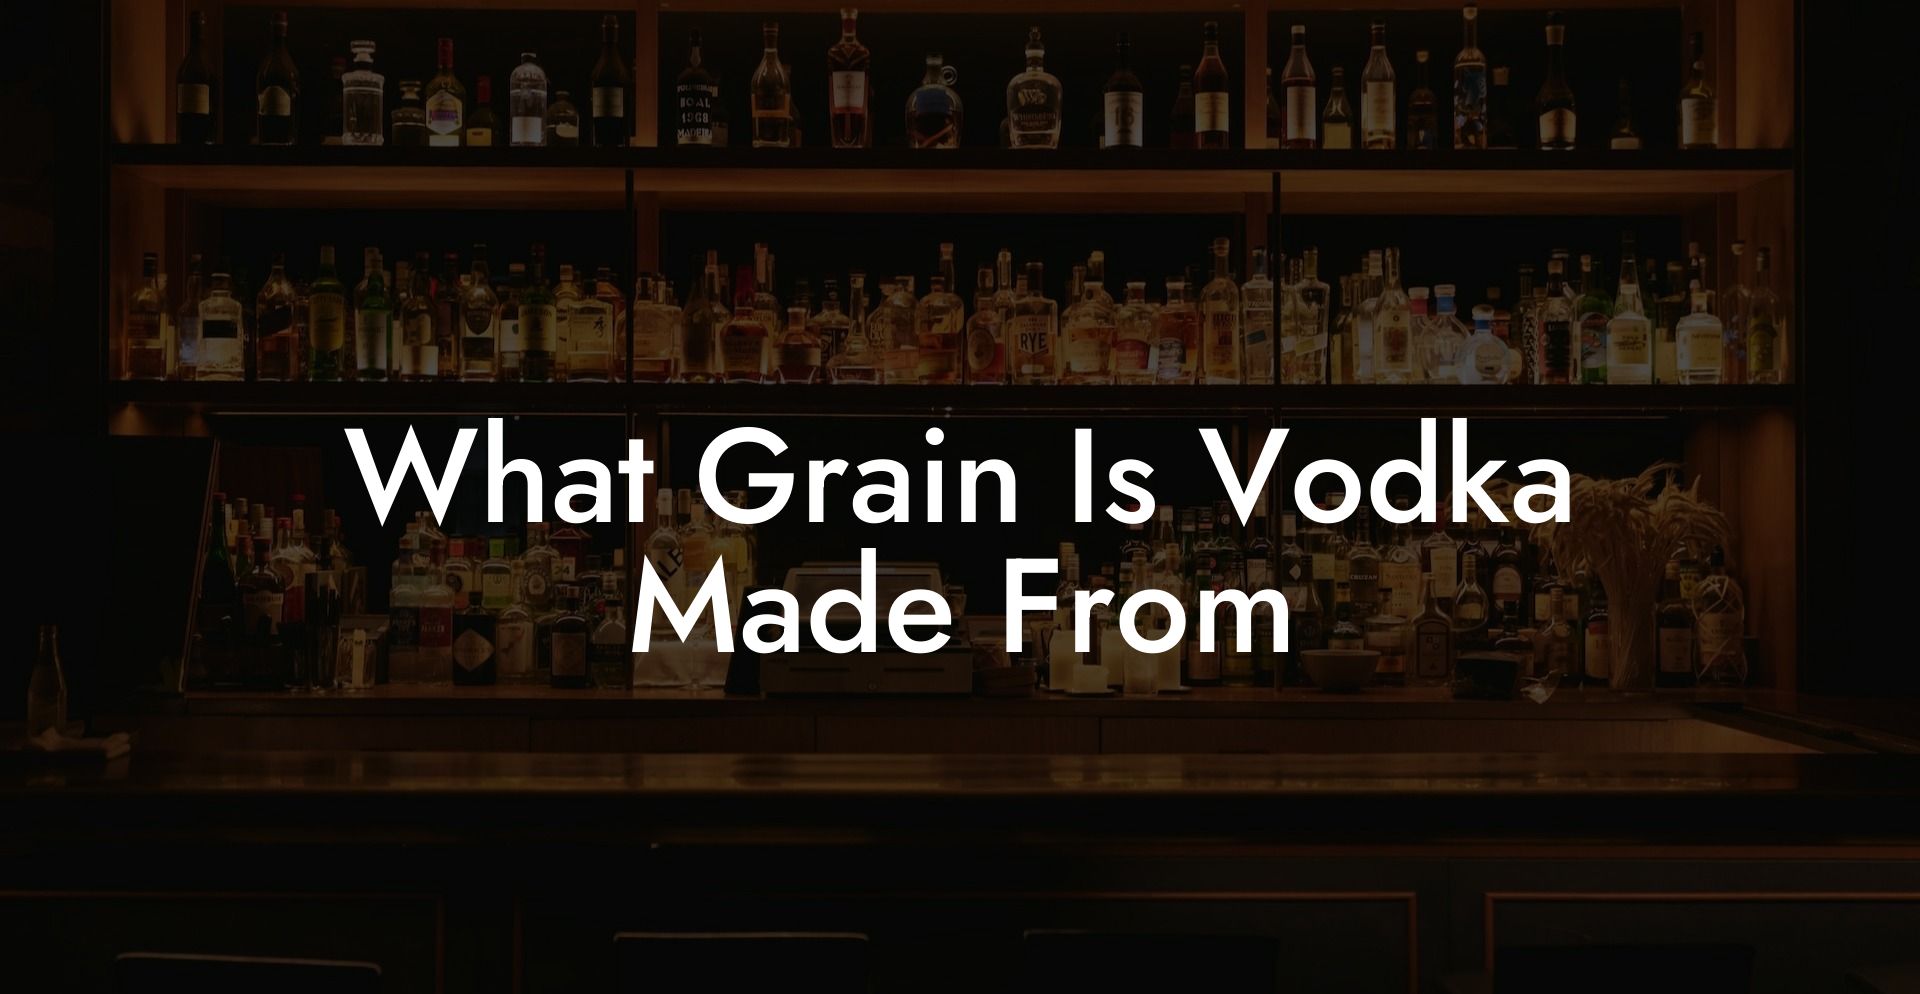 What Grain Is Vodka Made From